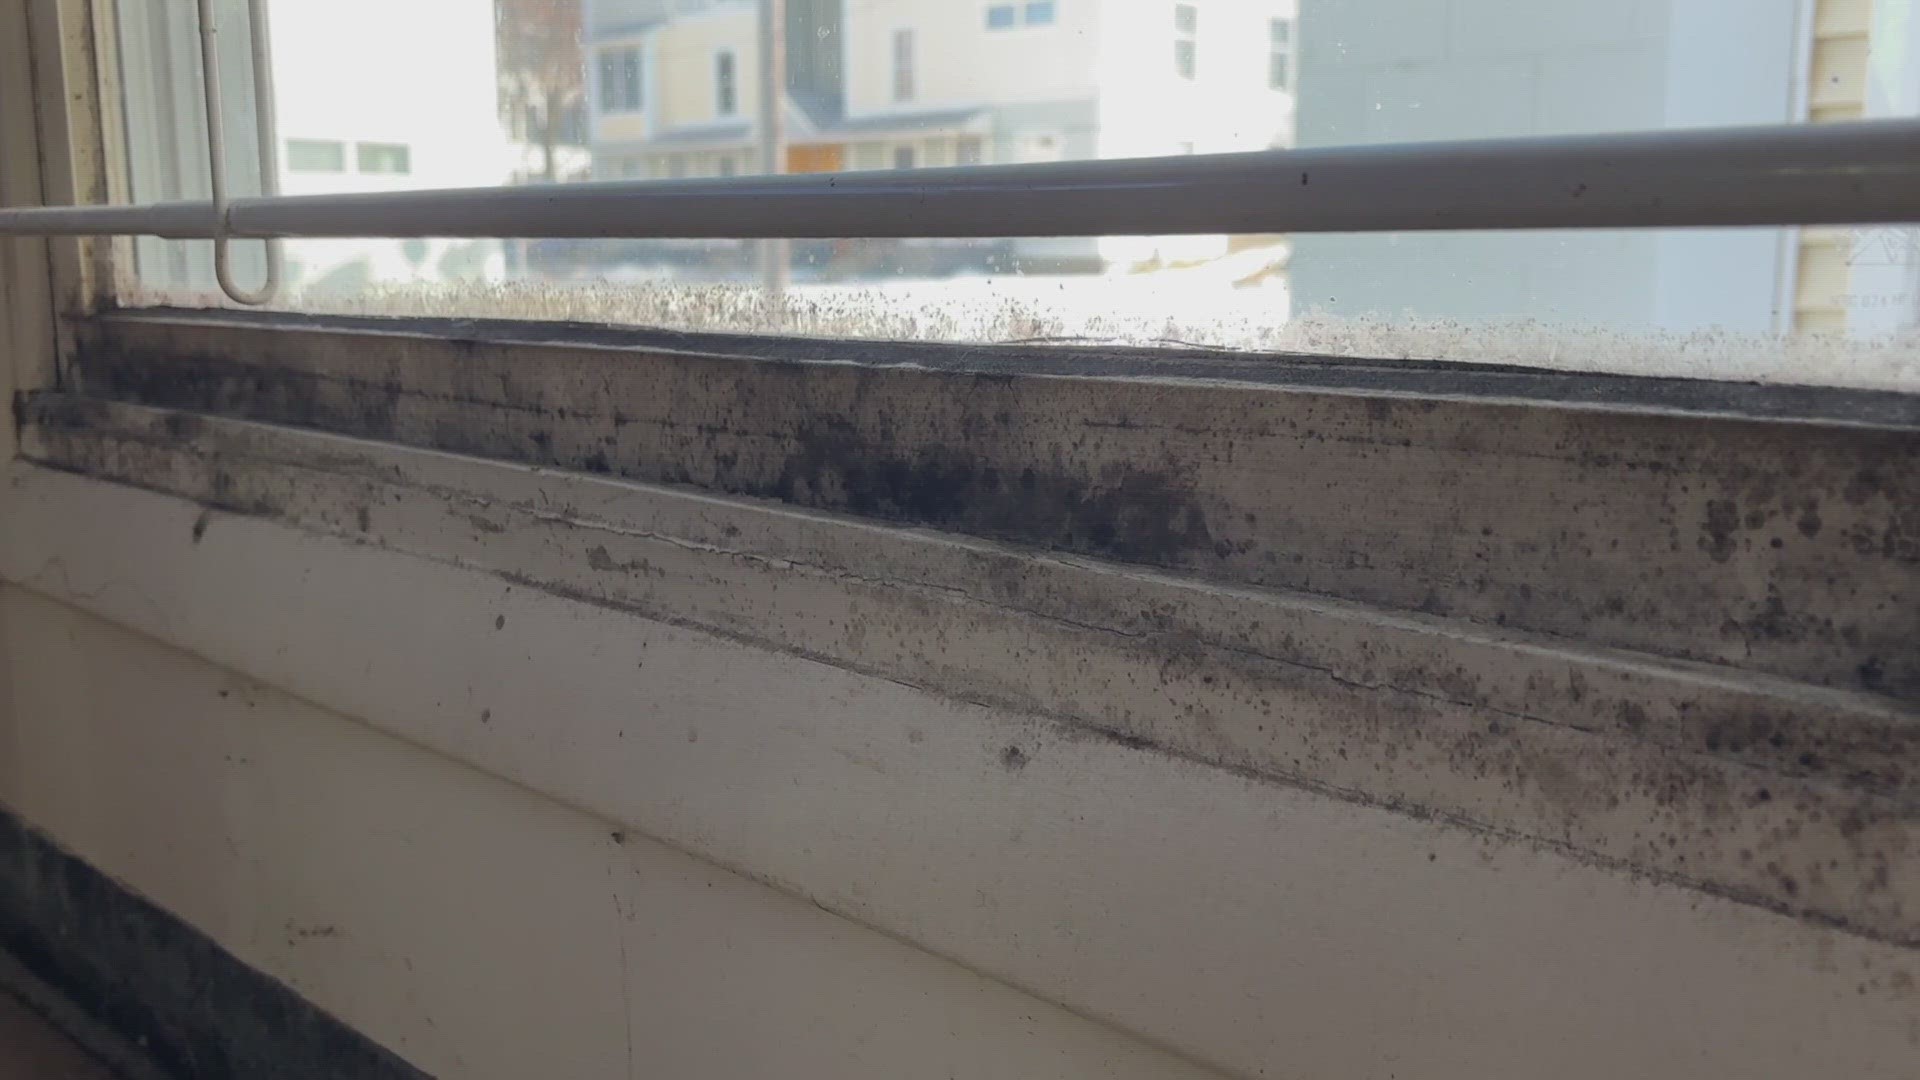 One of the property managers said he told his supervisors about the concerns about the black-colored mold detected in several apartments.